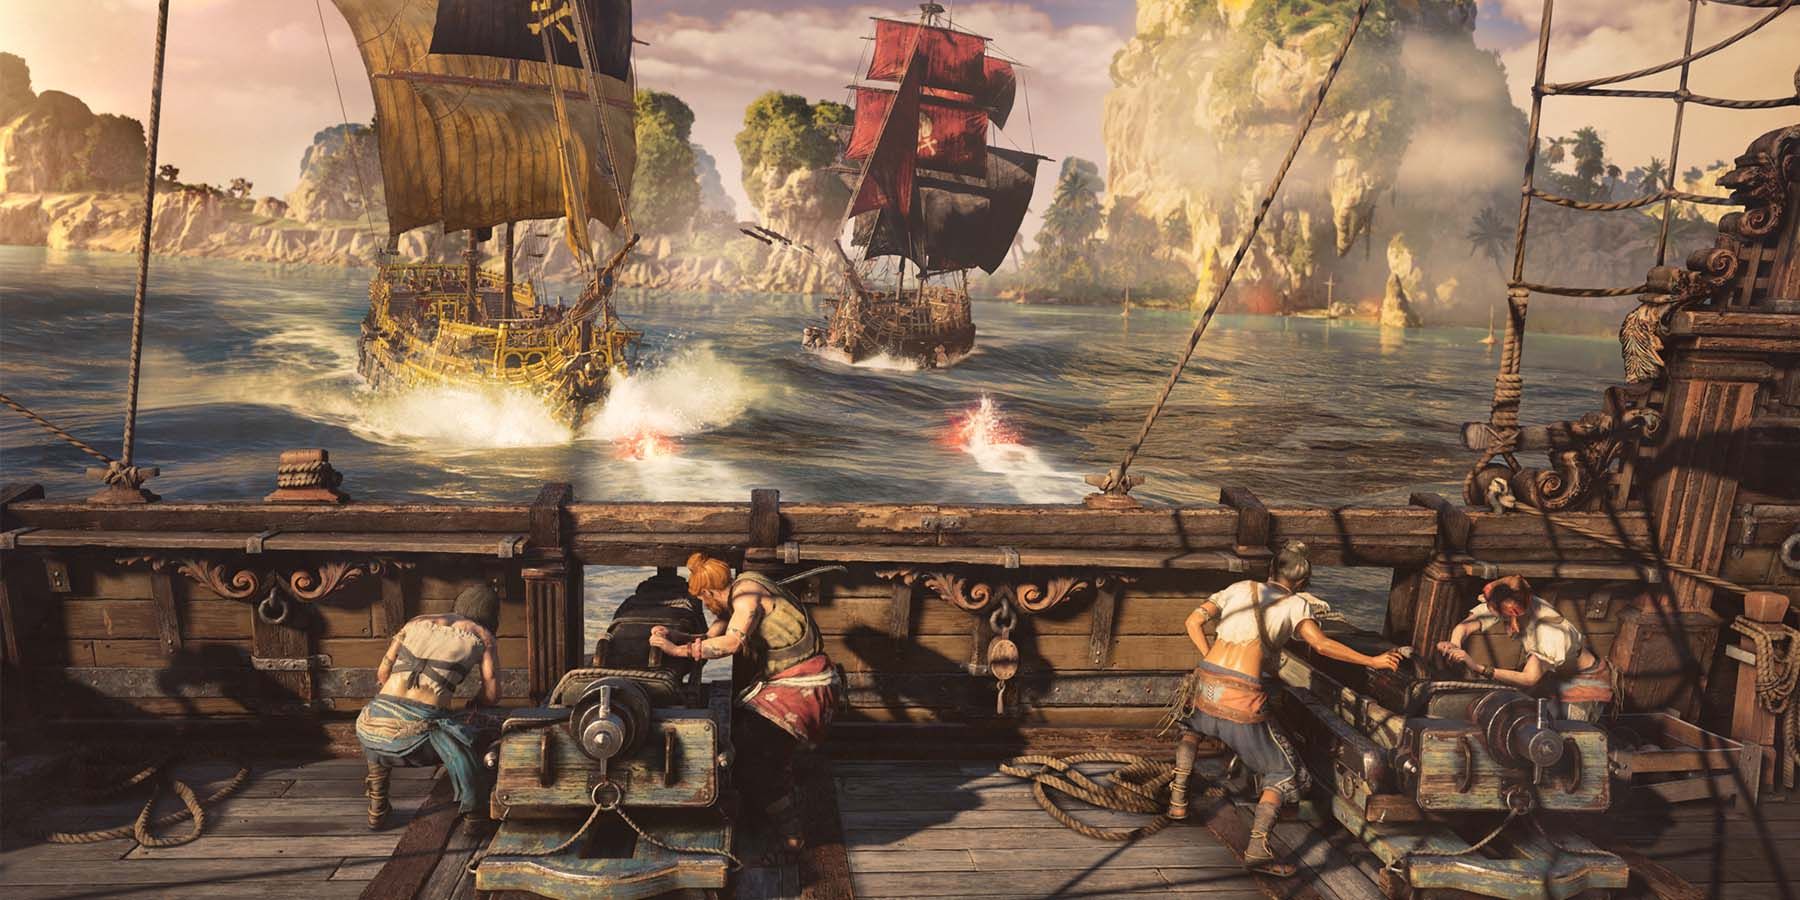 Assassin's Creed IV Black Flag is getting a remake, but Skull and